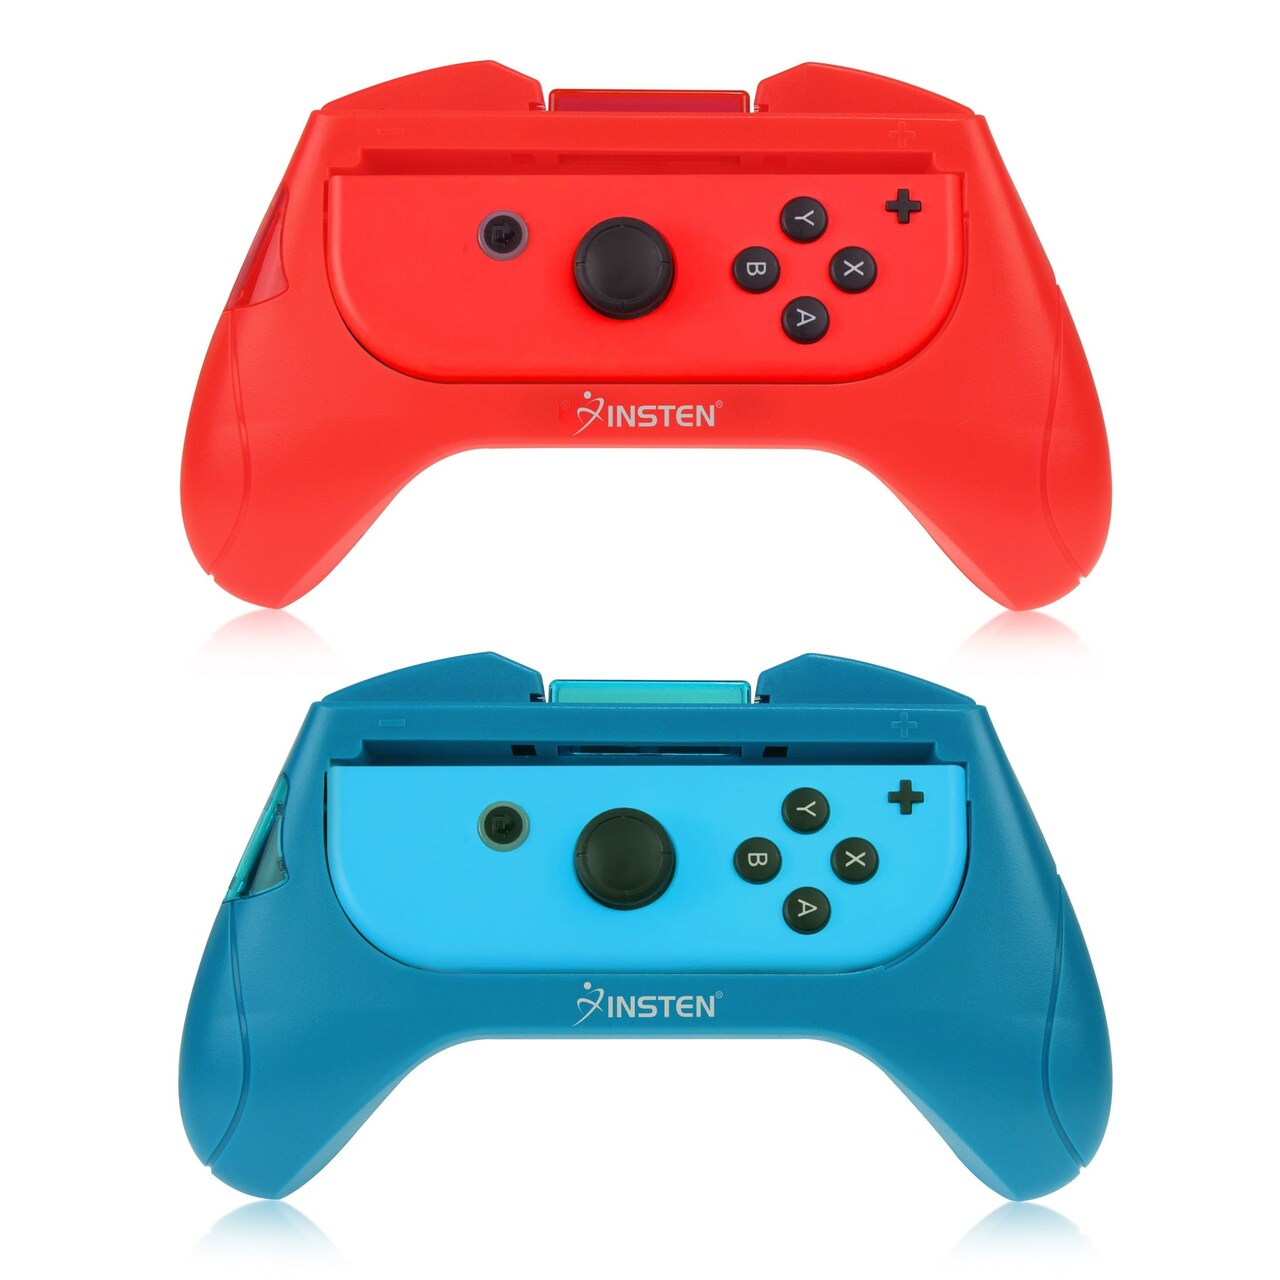 Insten Controller Grip Compatible with Nintendo Switch Joycon, Protevtive, Comfort, Hand Grips, Blue and Red